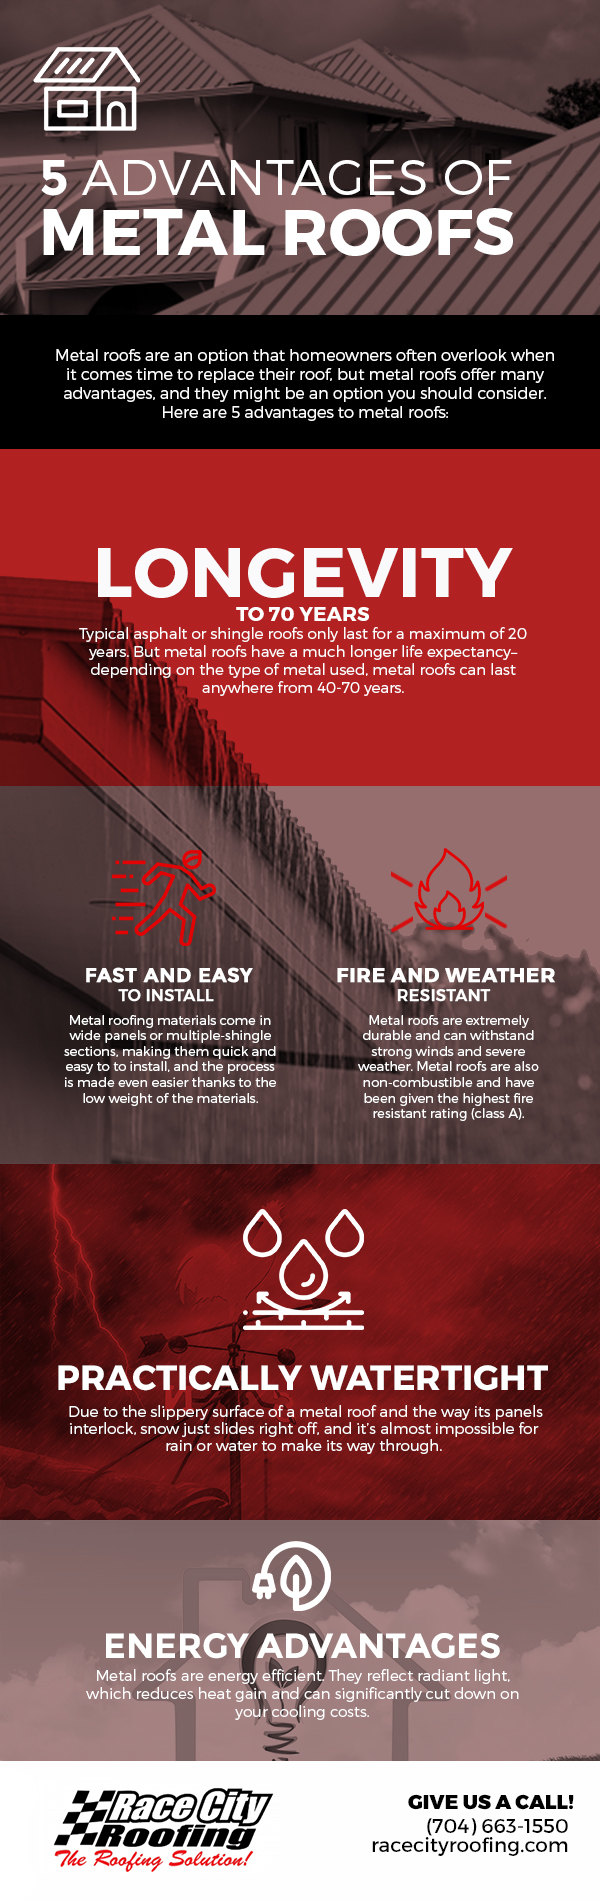 5 Advantages of Metal Roofs